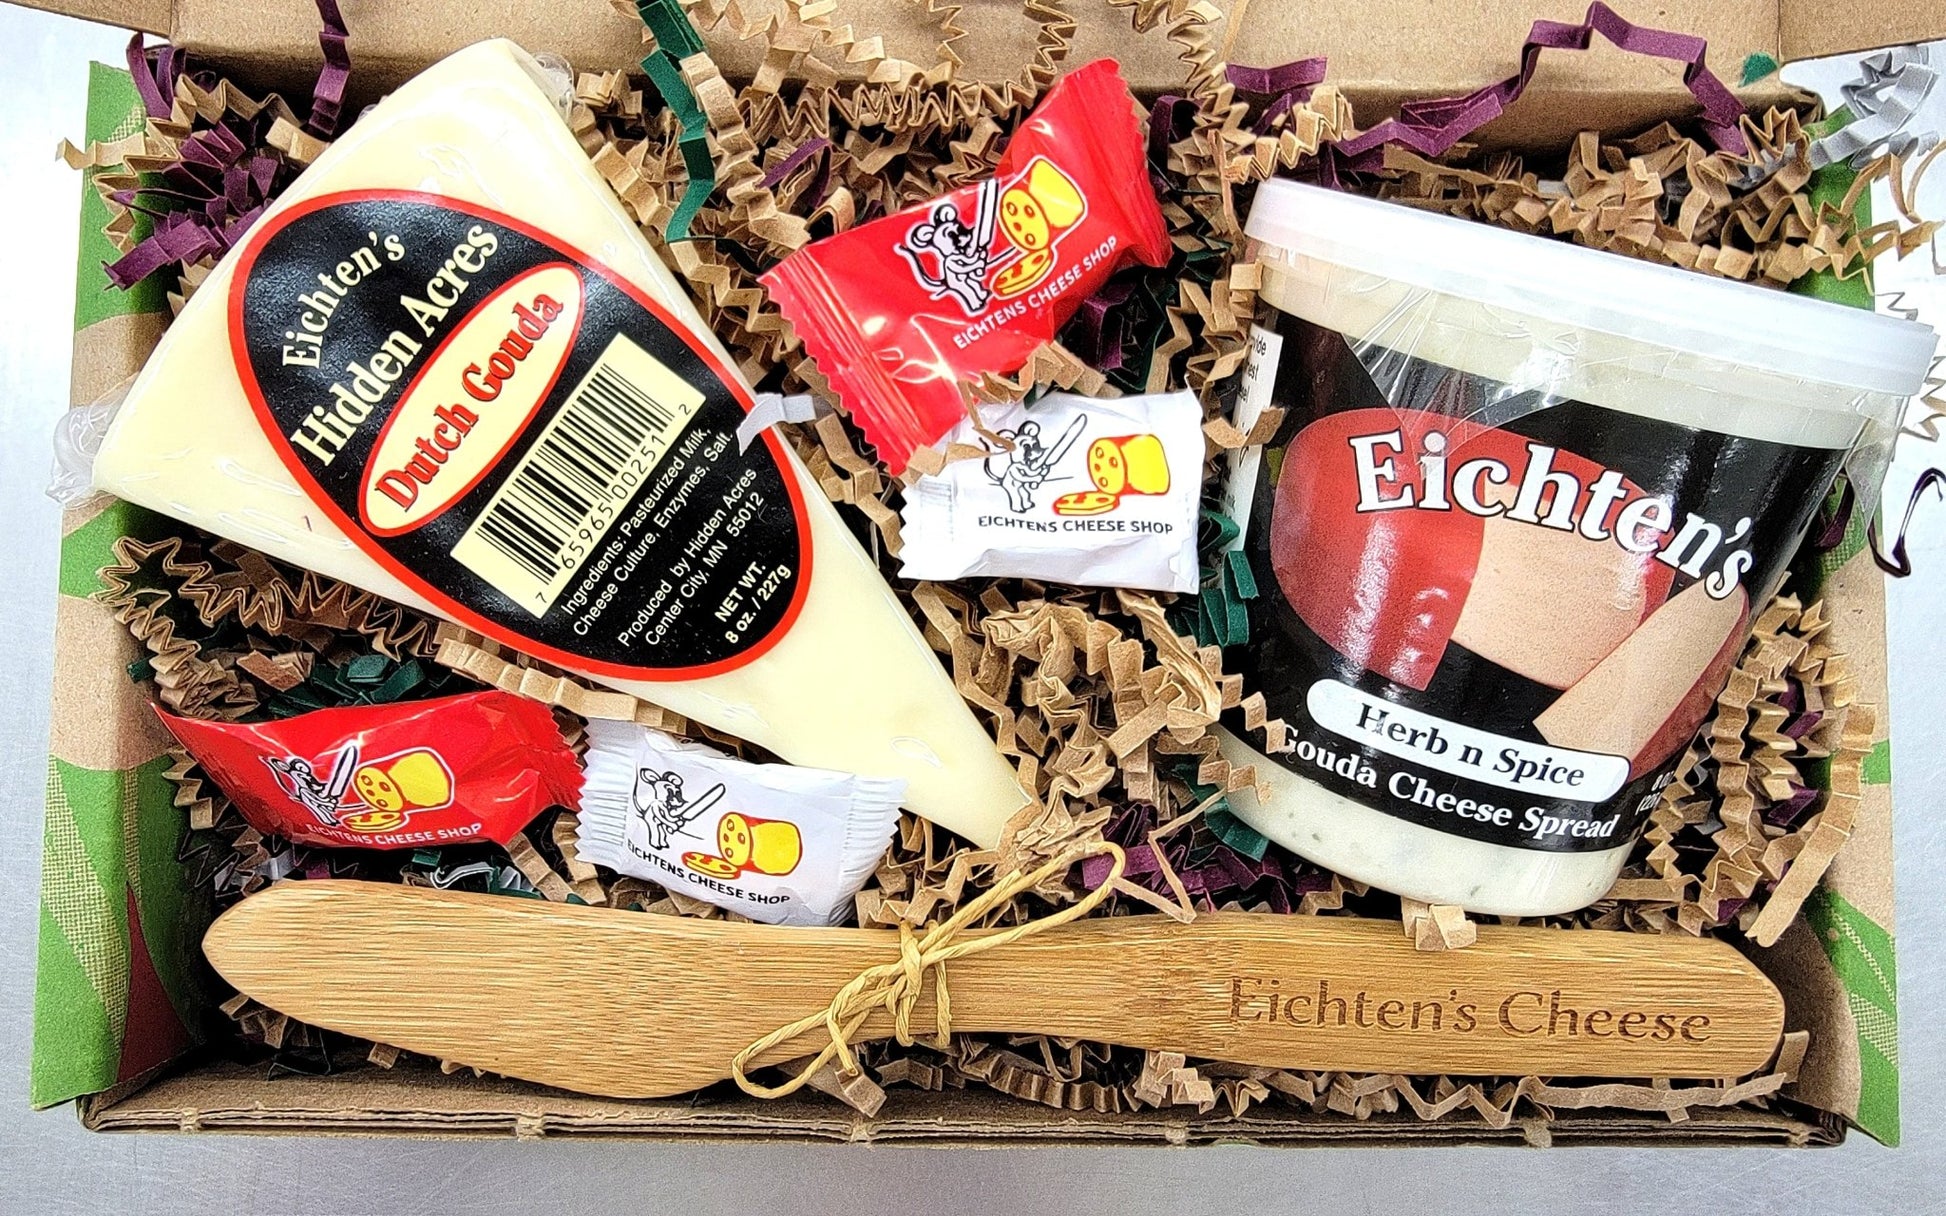 Gouda For you Gift Box - Eichtens Cheeses, Gifts & FoodsGift Boxes & Tins